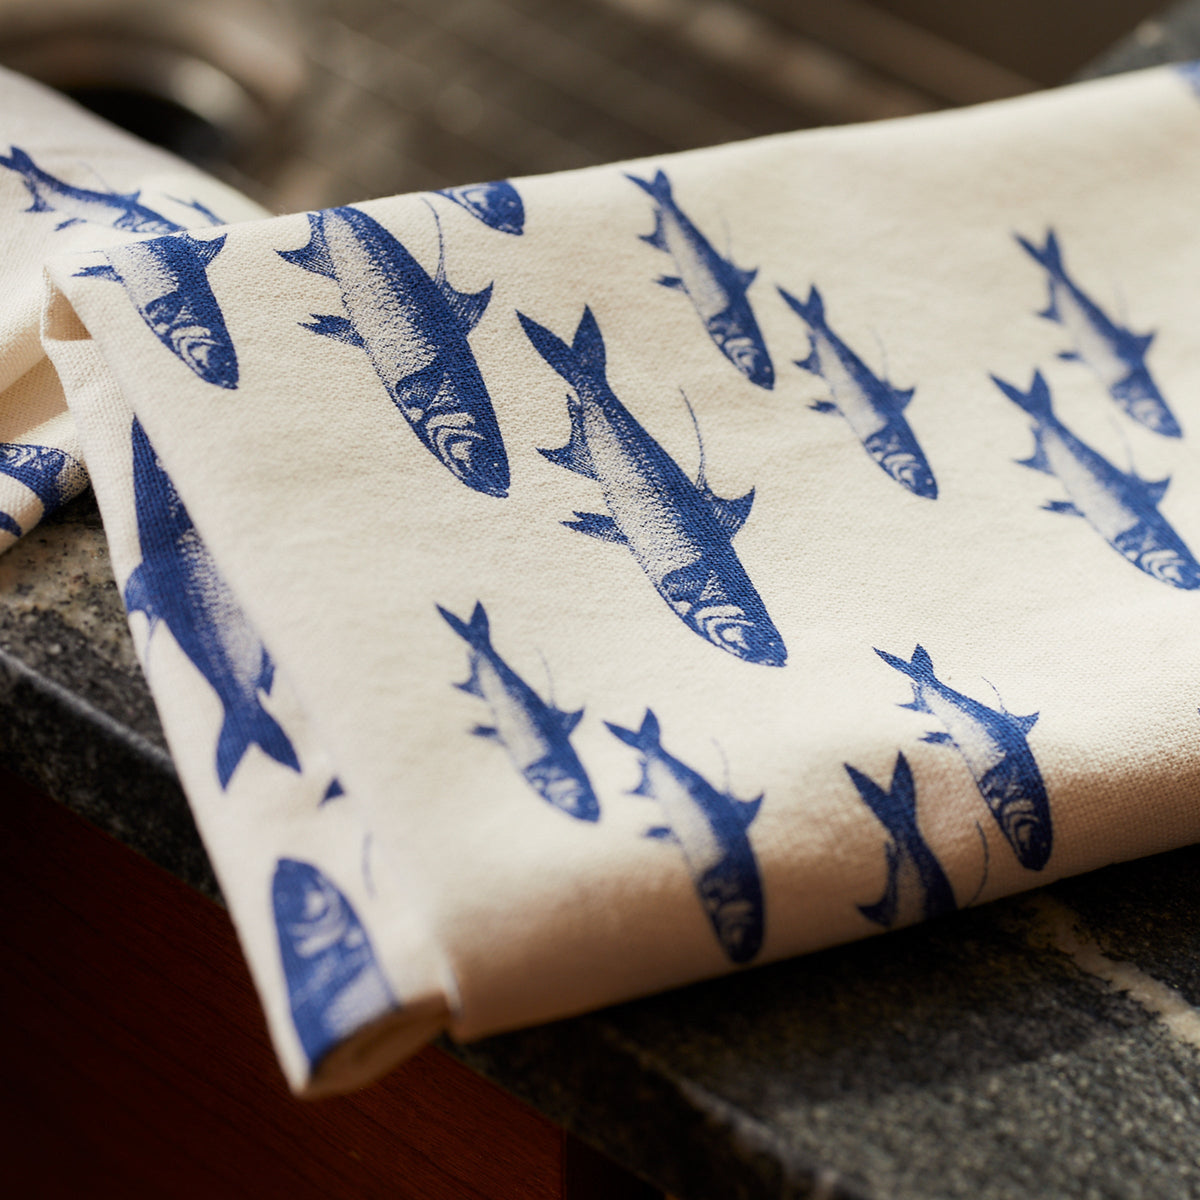 This Caskata cotton tea towel features seafaring whimsy with School of Fish Kitchen Towels Set/2 designs, perfect for adding a touch of marine charm to your kitchen.